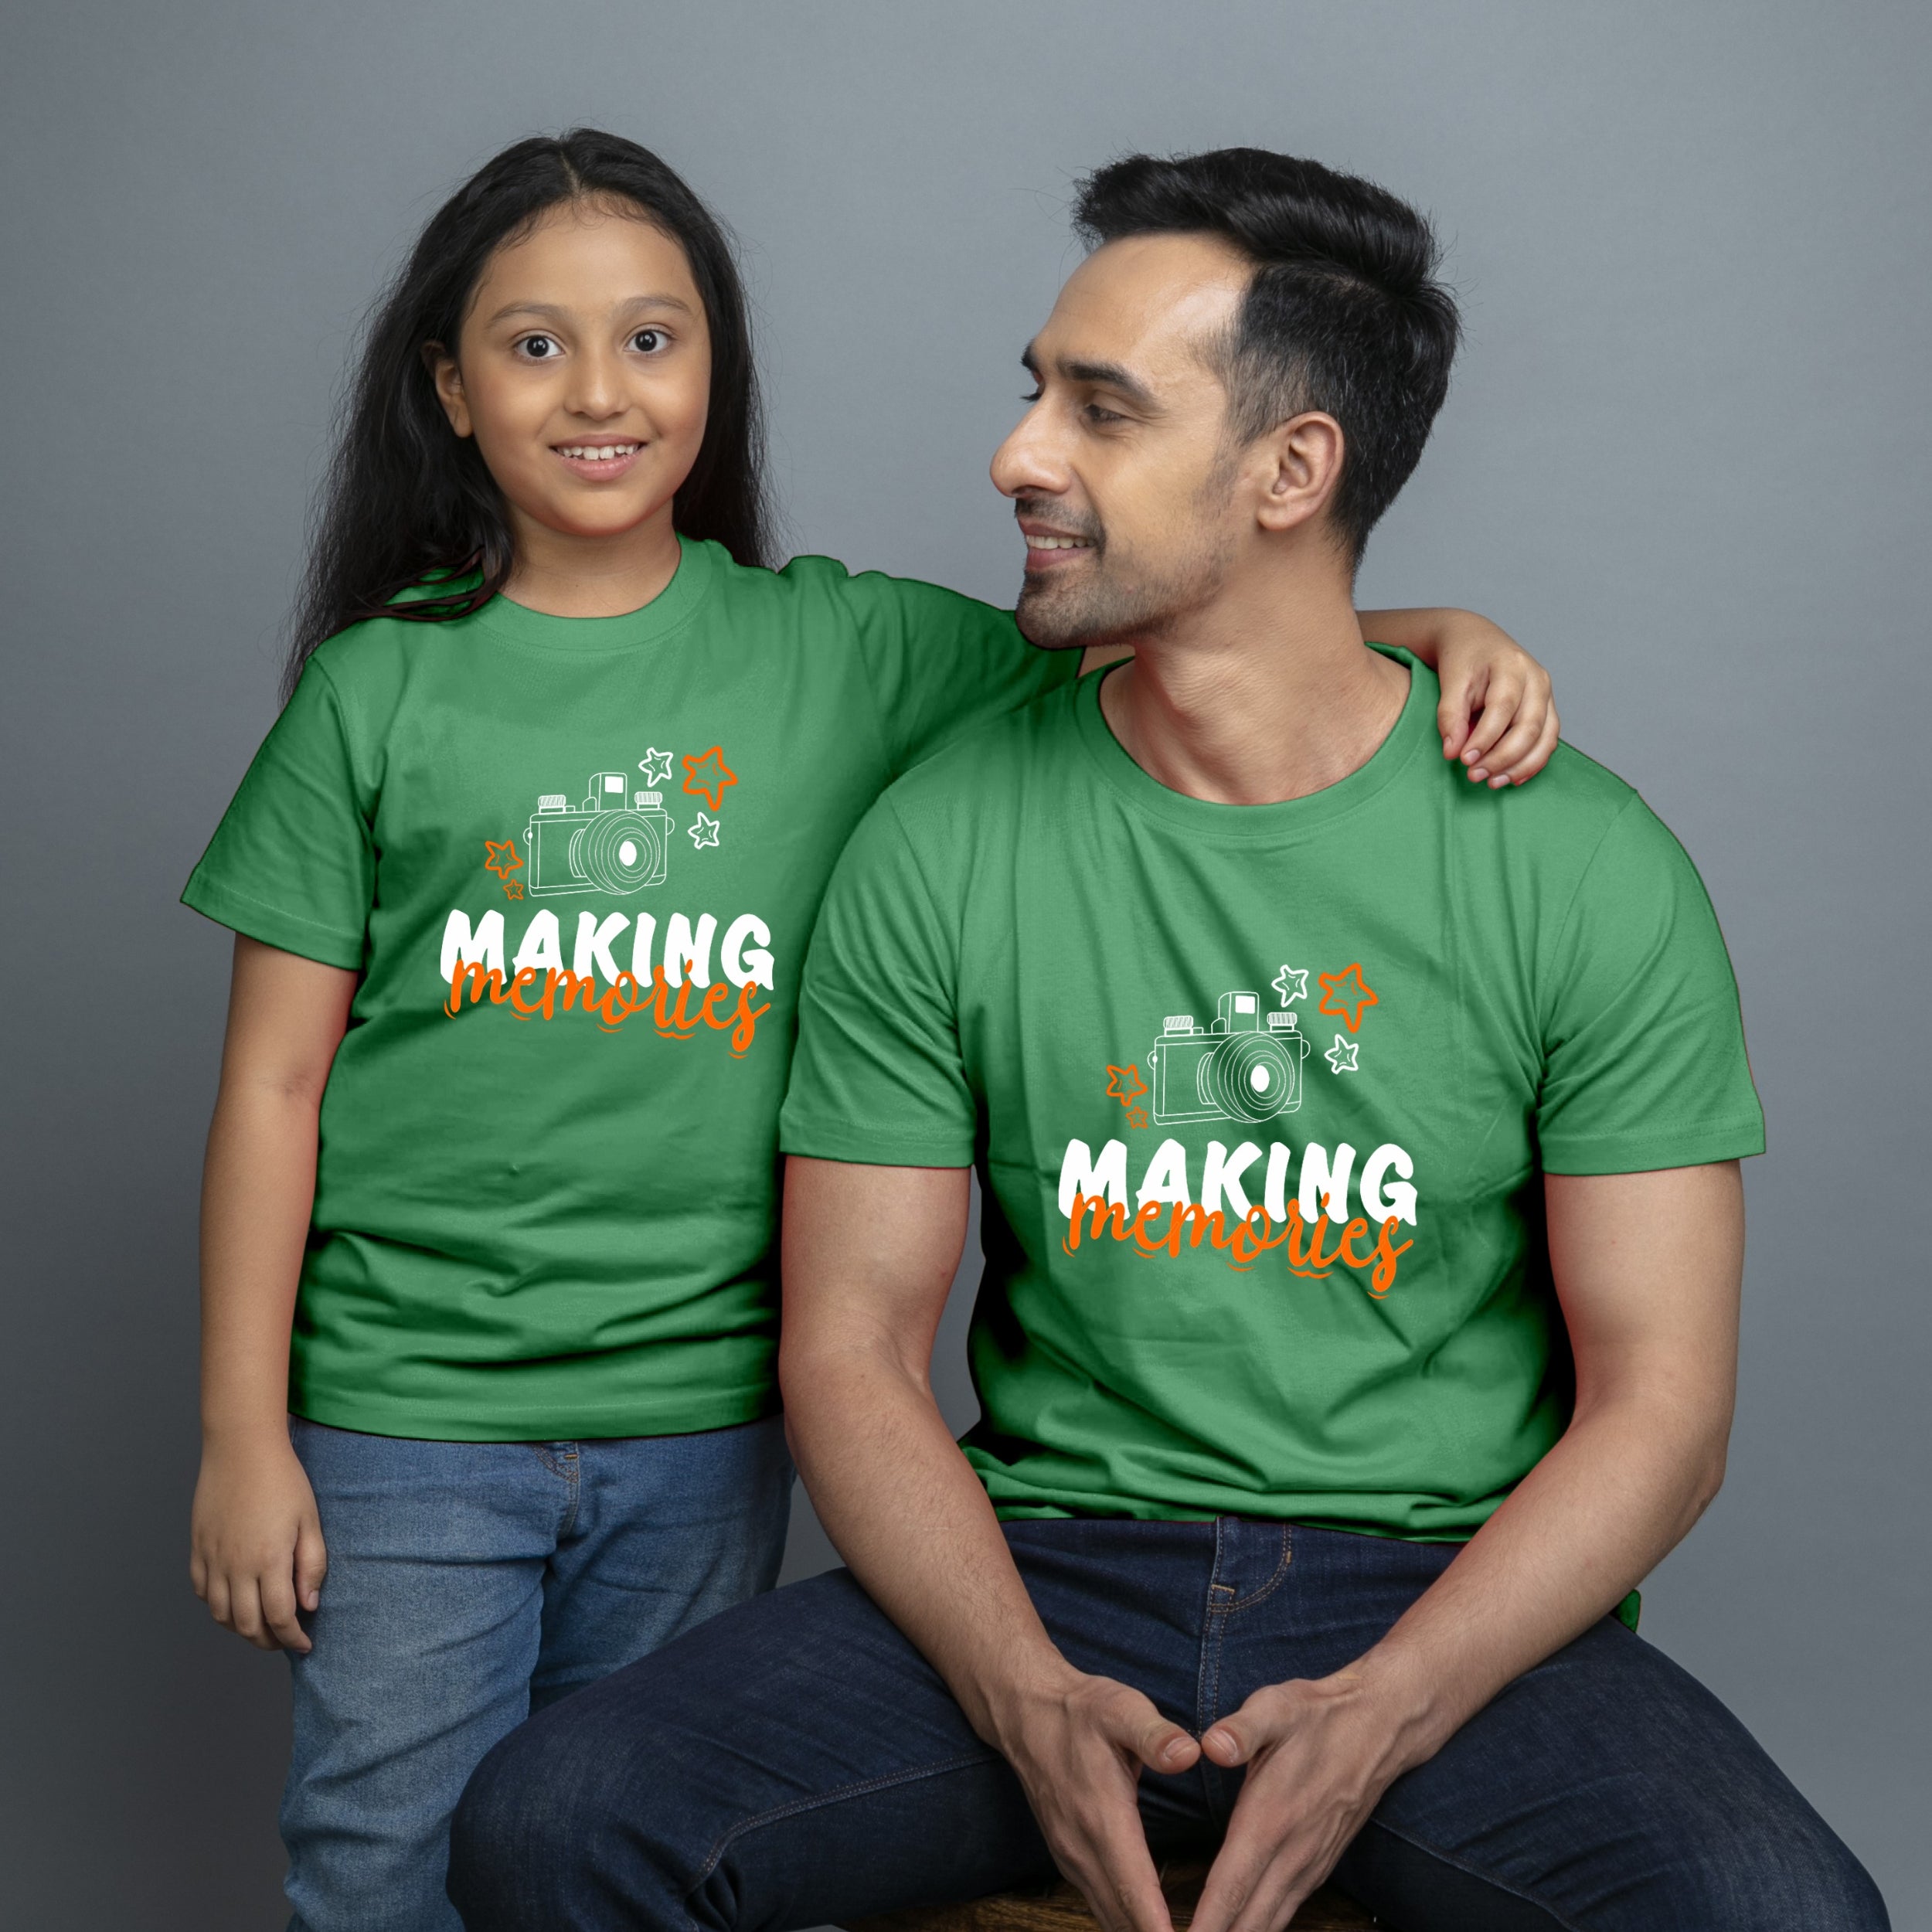 Family of 2 t shirt for Dad Daughter in Green Colour- Making Memories Variant